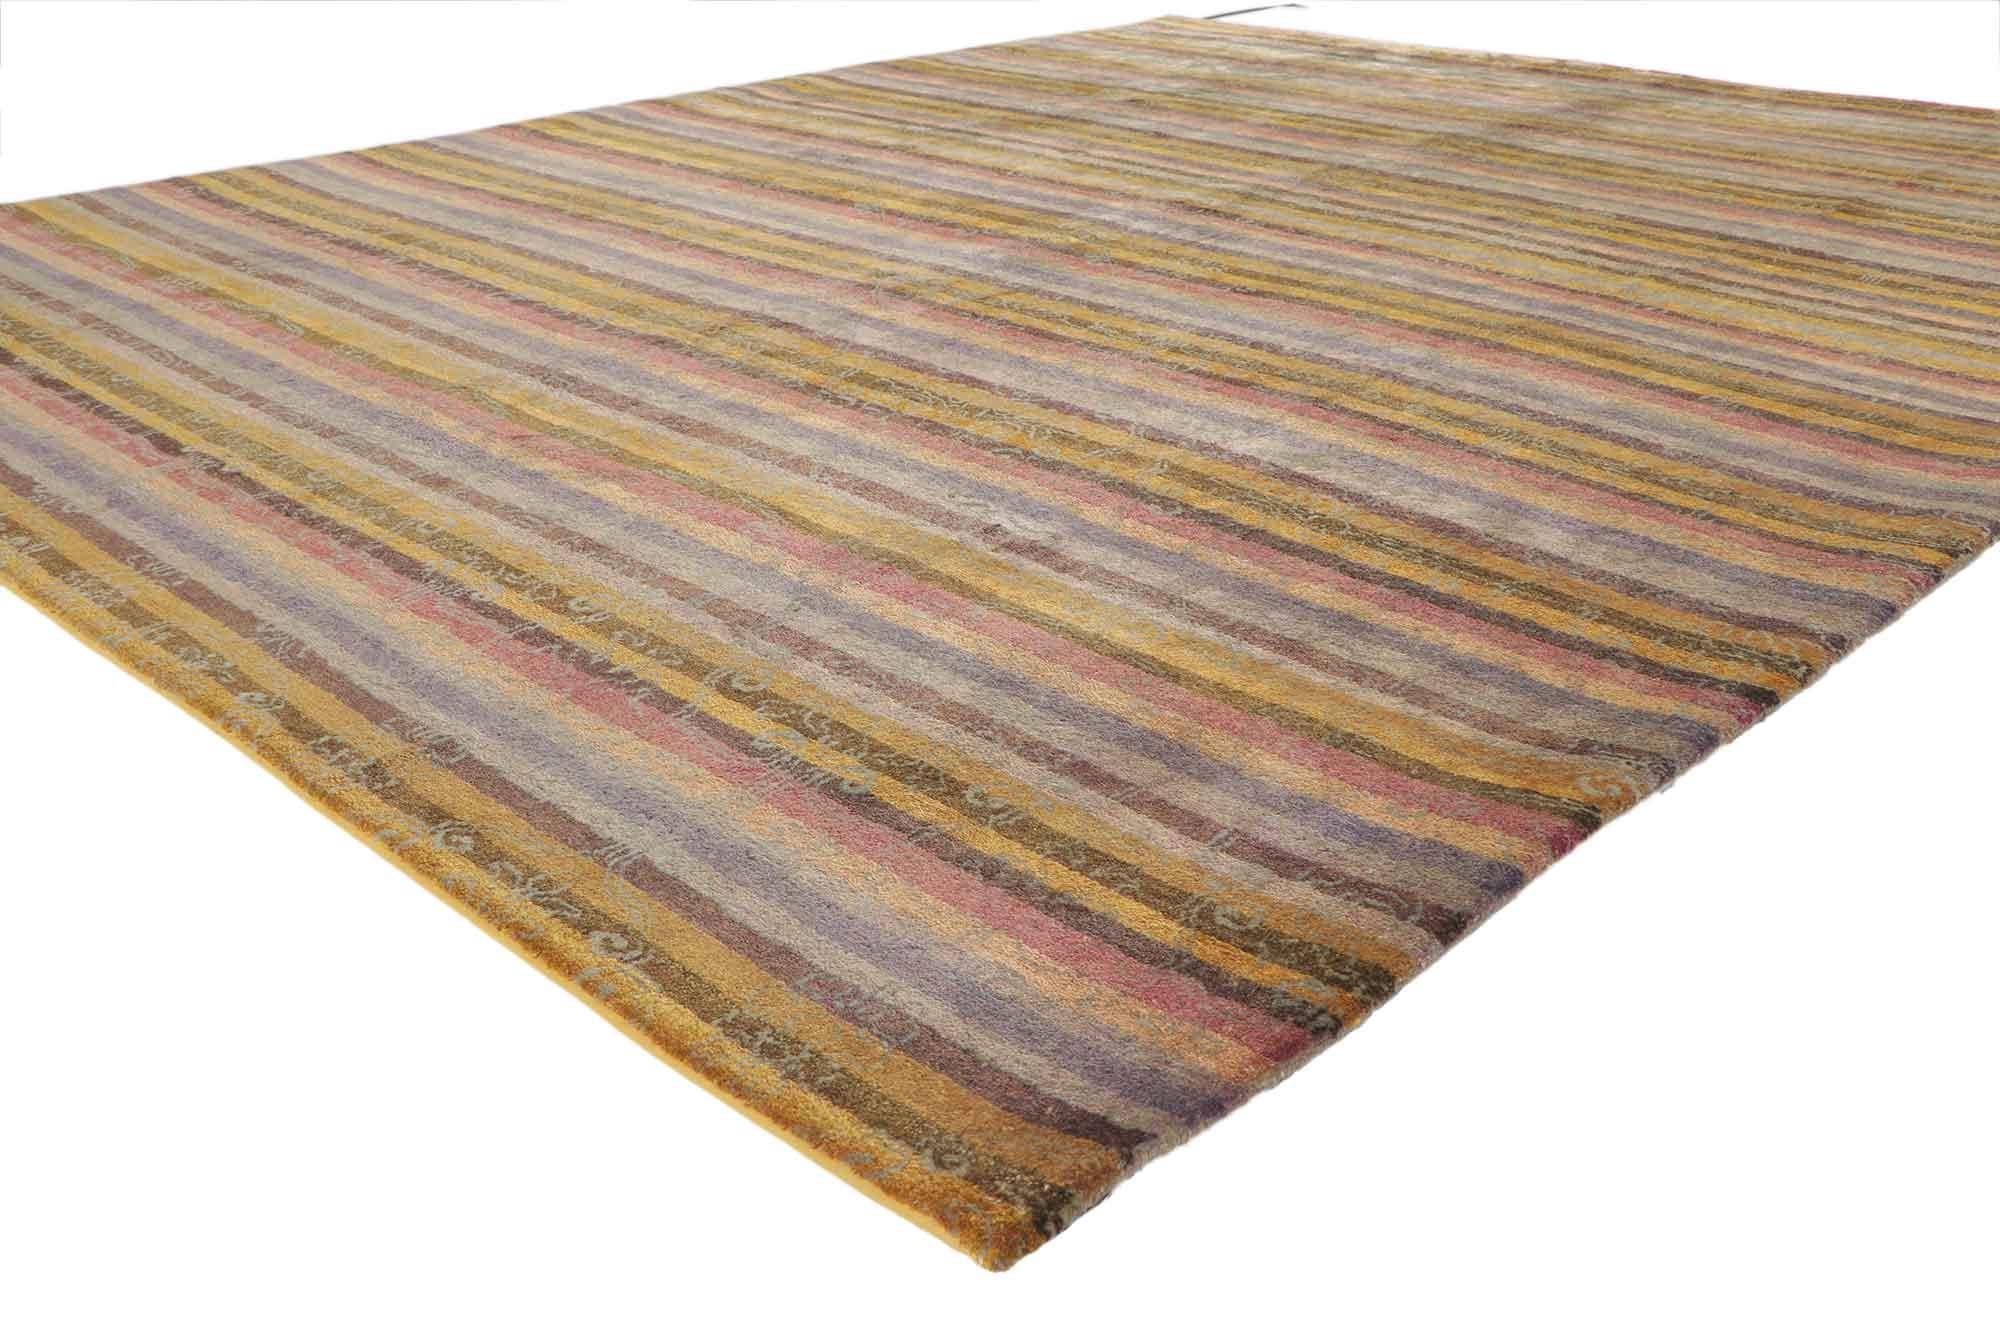 30227, Transitional Indian striped area rug with Modern Cottage style and Bucolic Charm. This hand knotted wool transitional striped area rug features rows of warm colored bands with a subtle scroll pattern creating a timeless design. Emanating